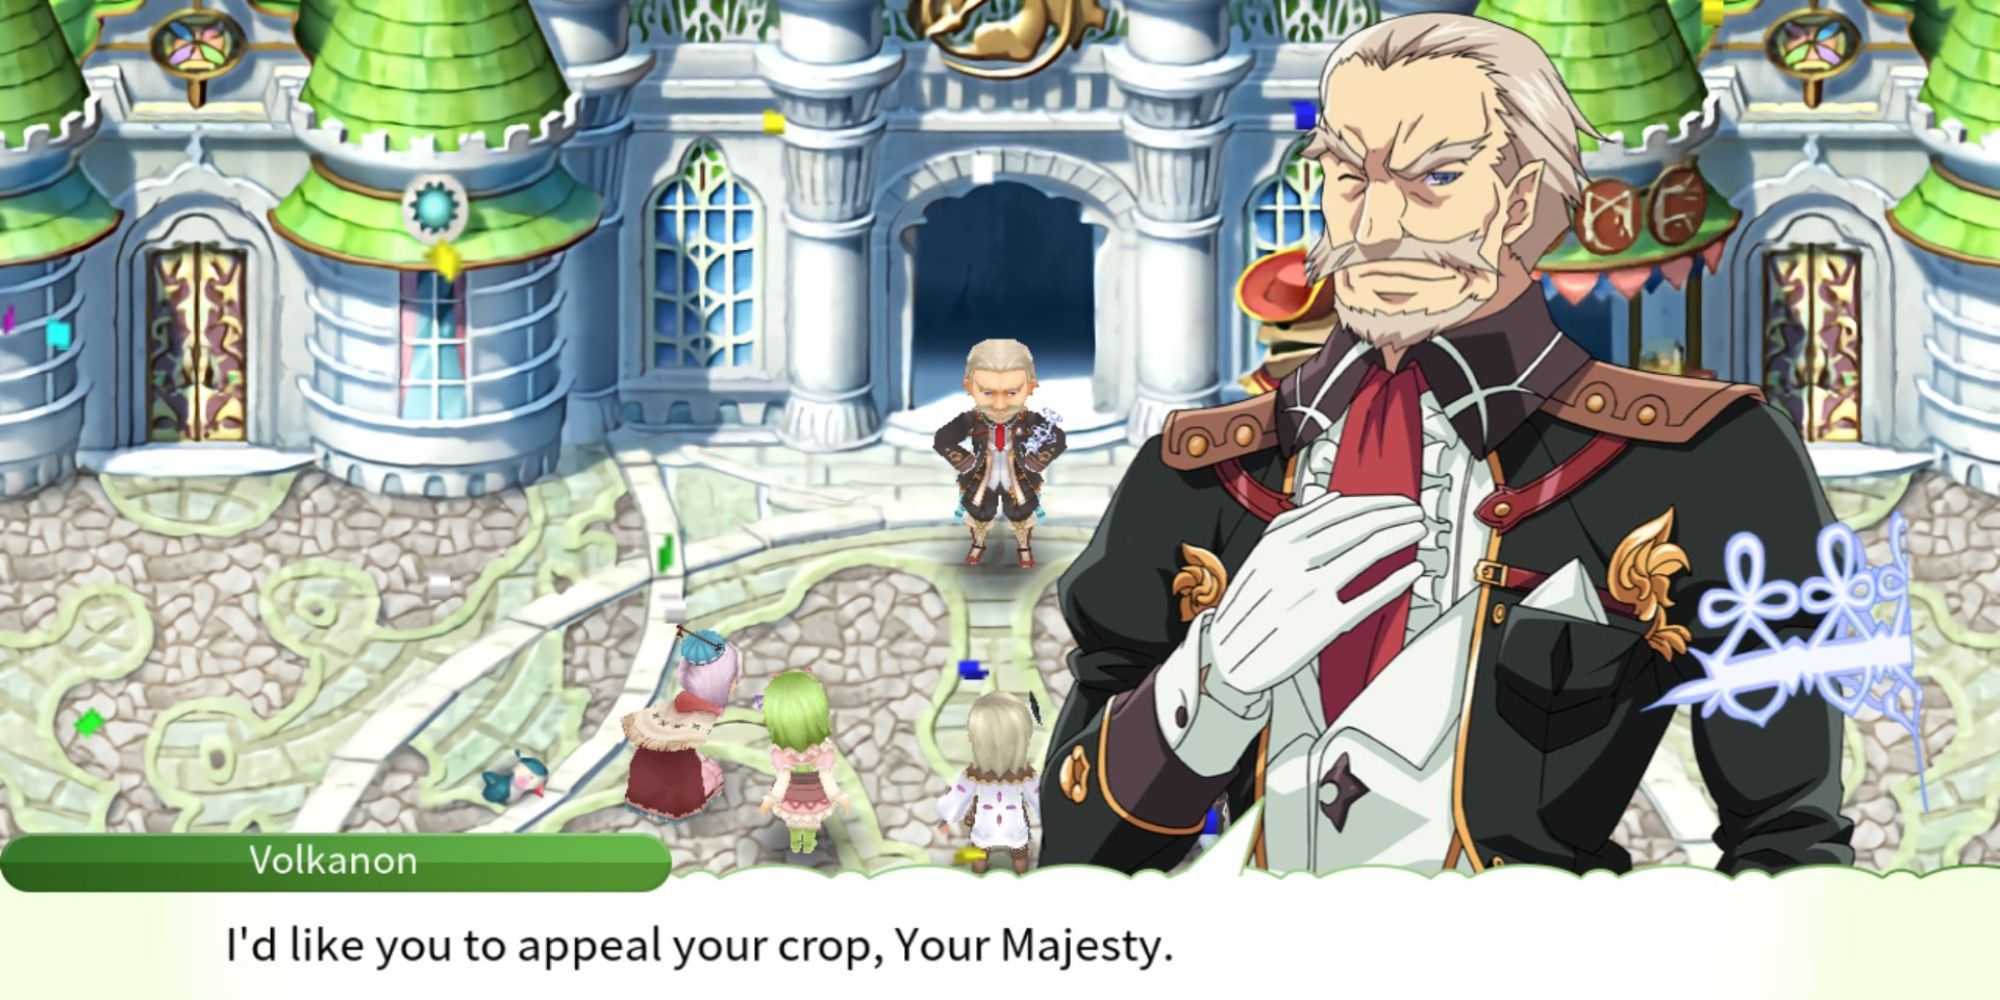 Volkanon addressing the player during the Spring Harvest Festival in Rune Factory 4